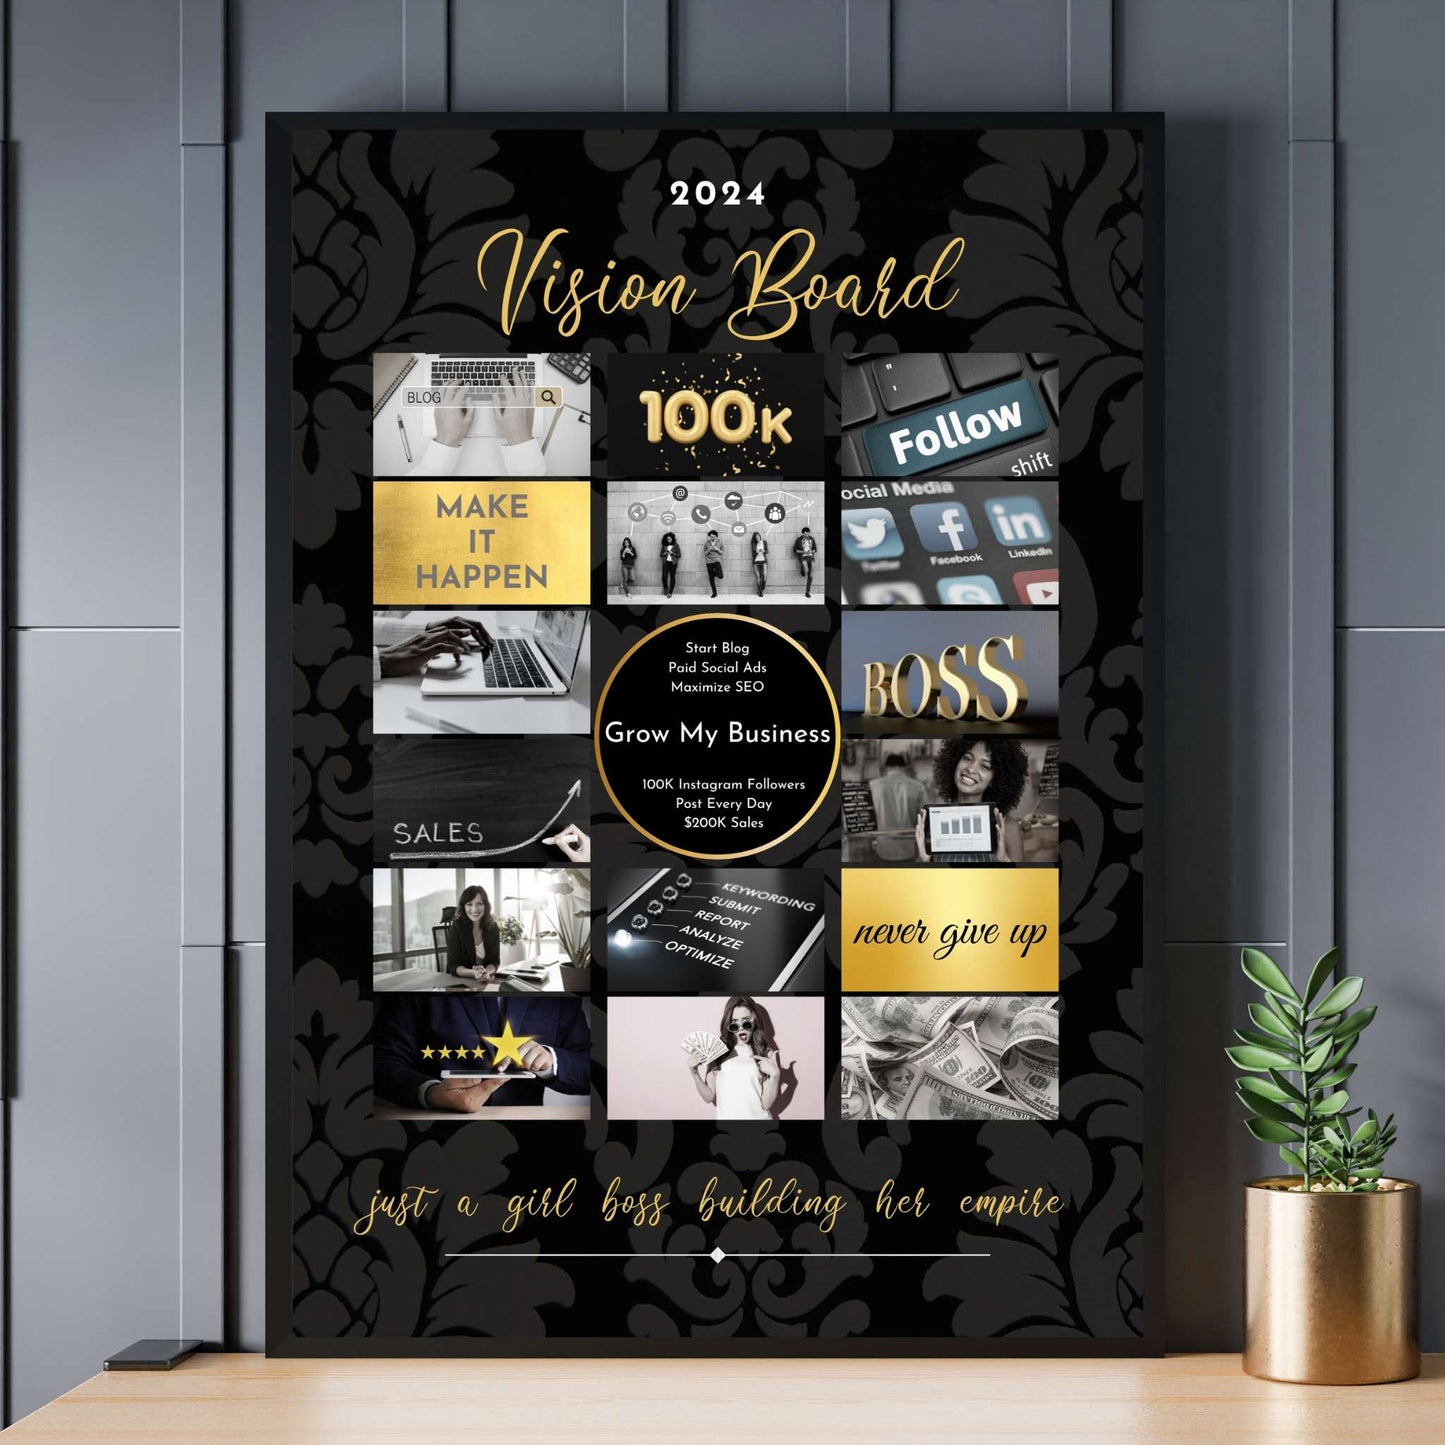 Black and gold vision board design in frame on shelf against modern interior wall